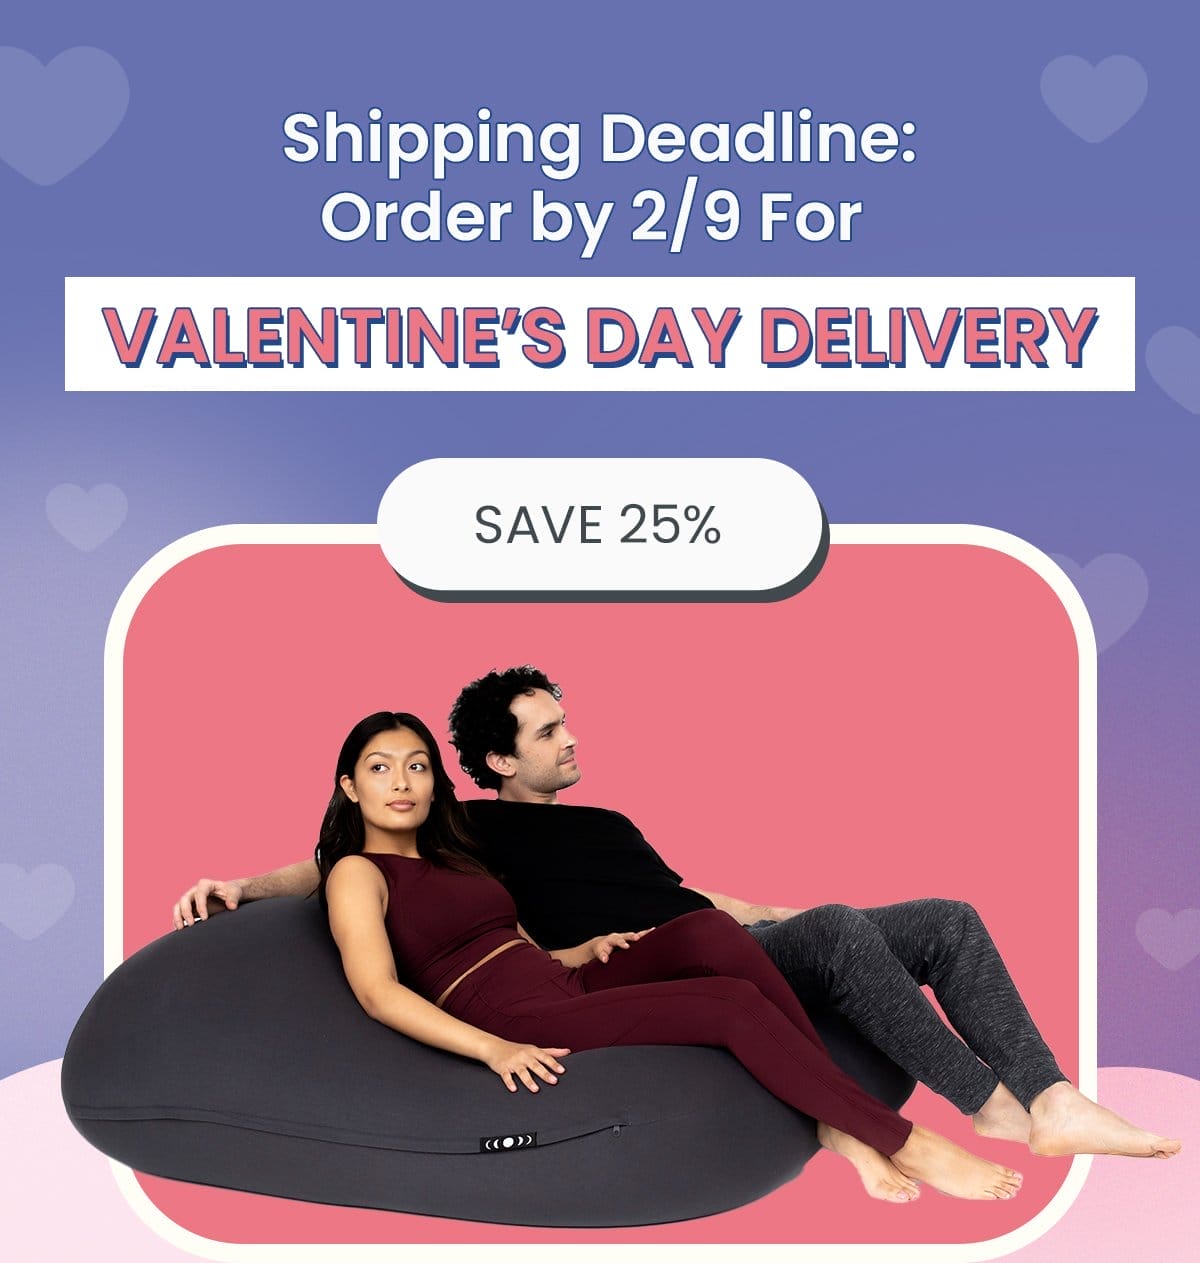 Order by 2/9 for Valentine's Day delivery